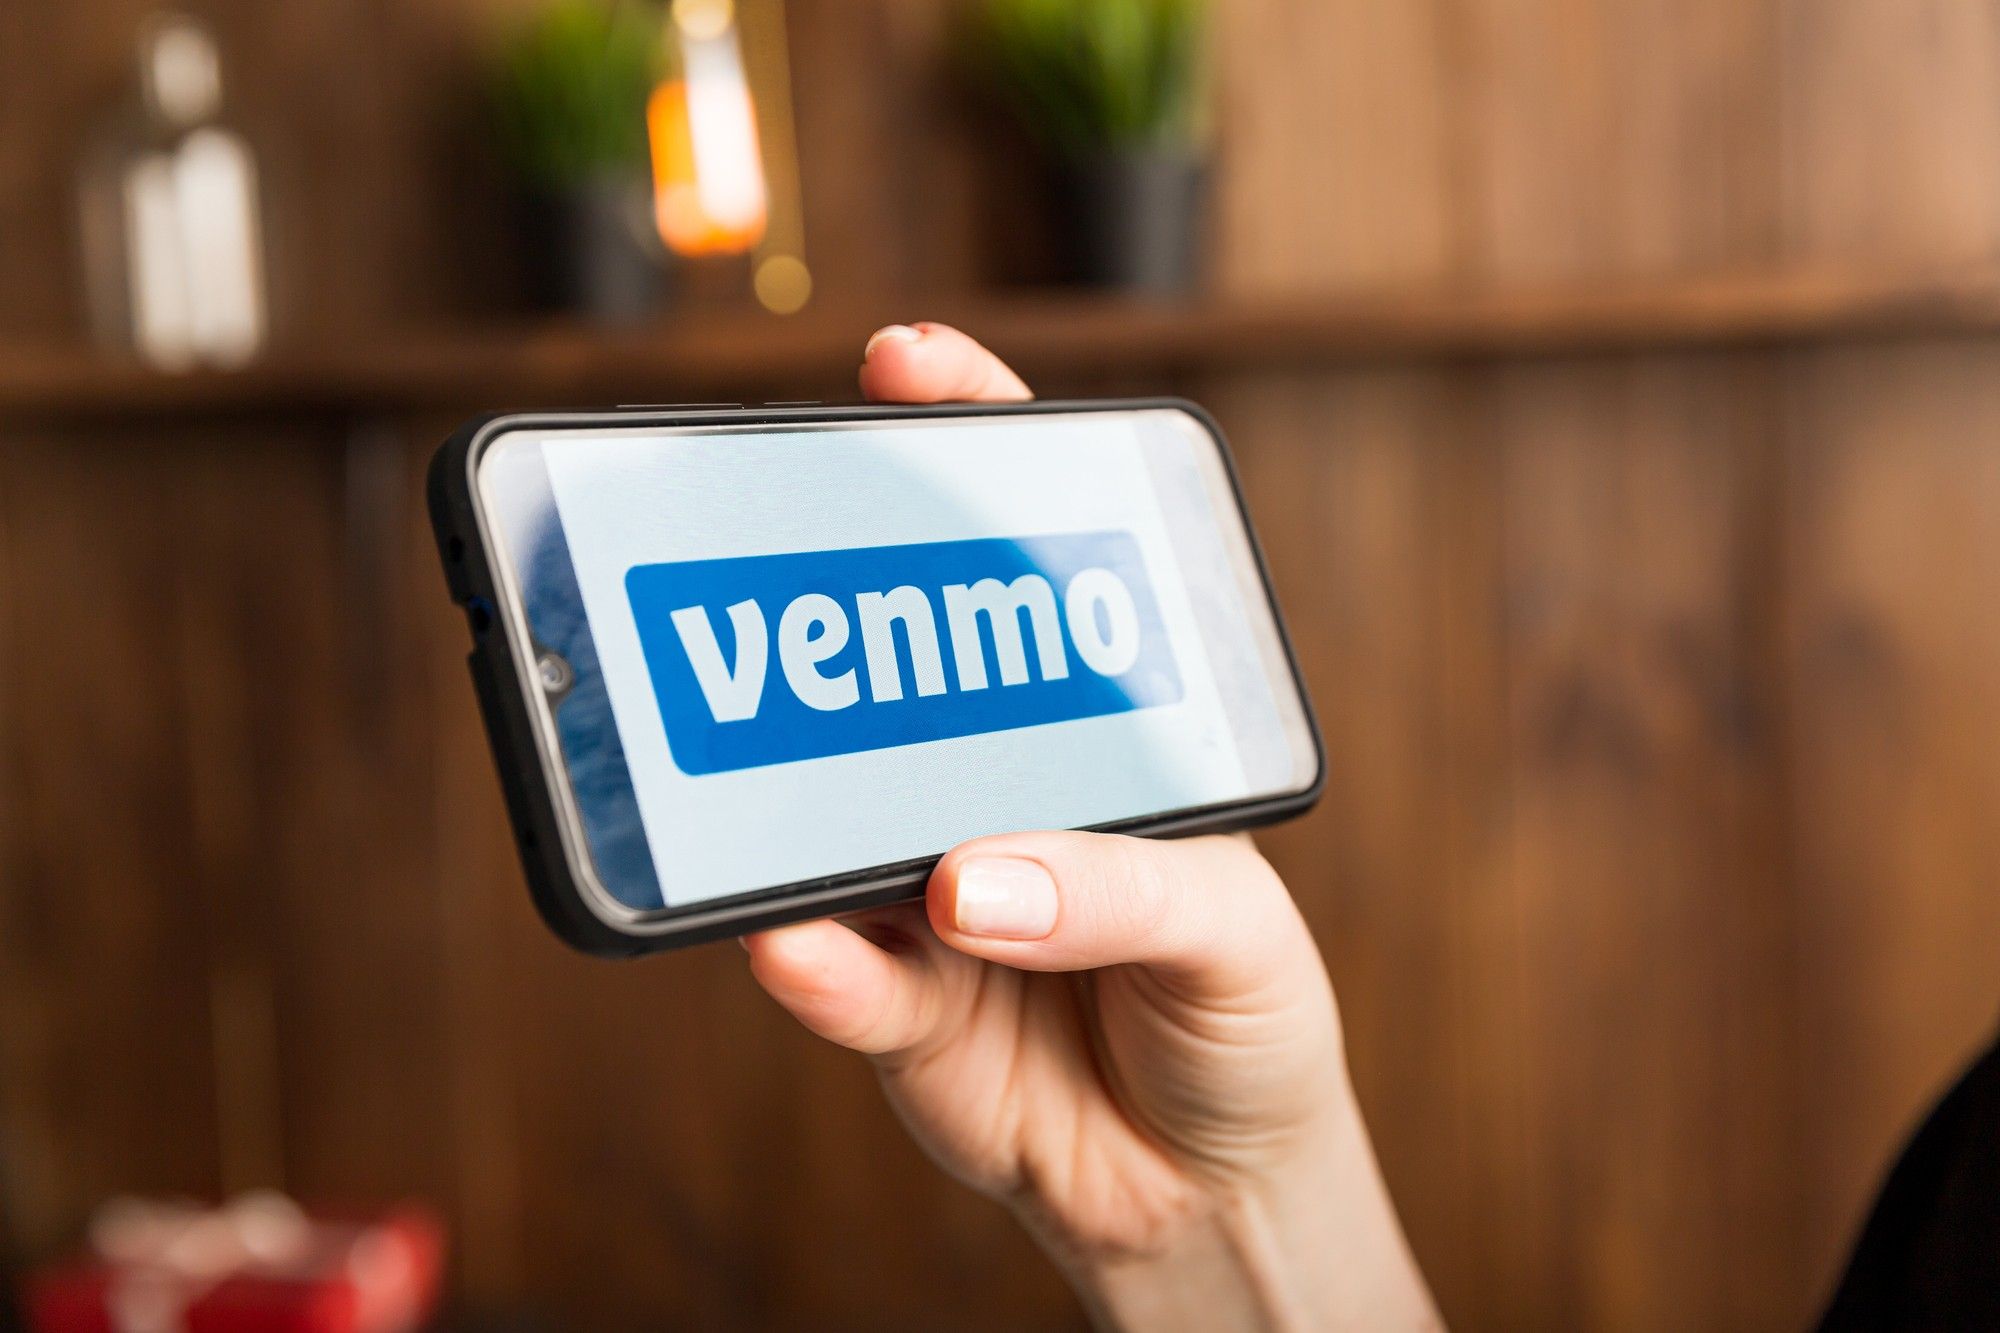 CFPB investigating Venmo collection practices